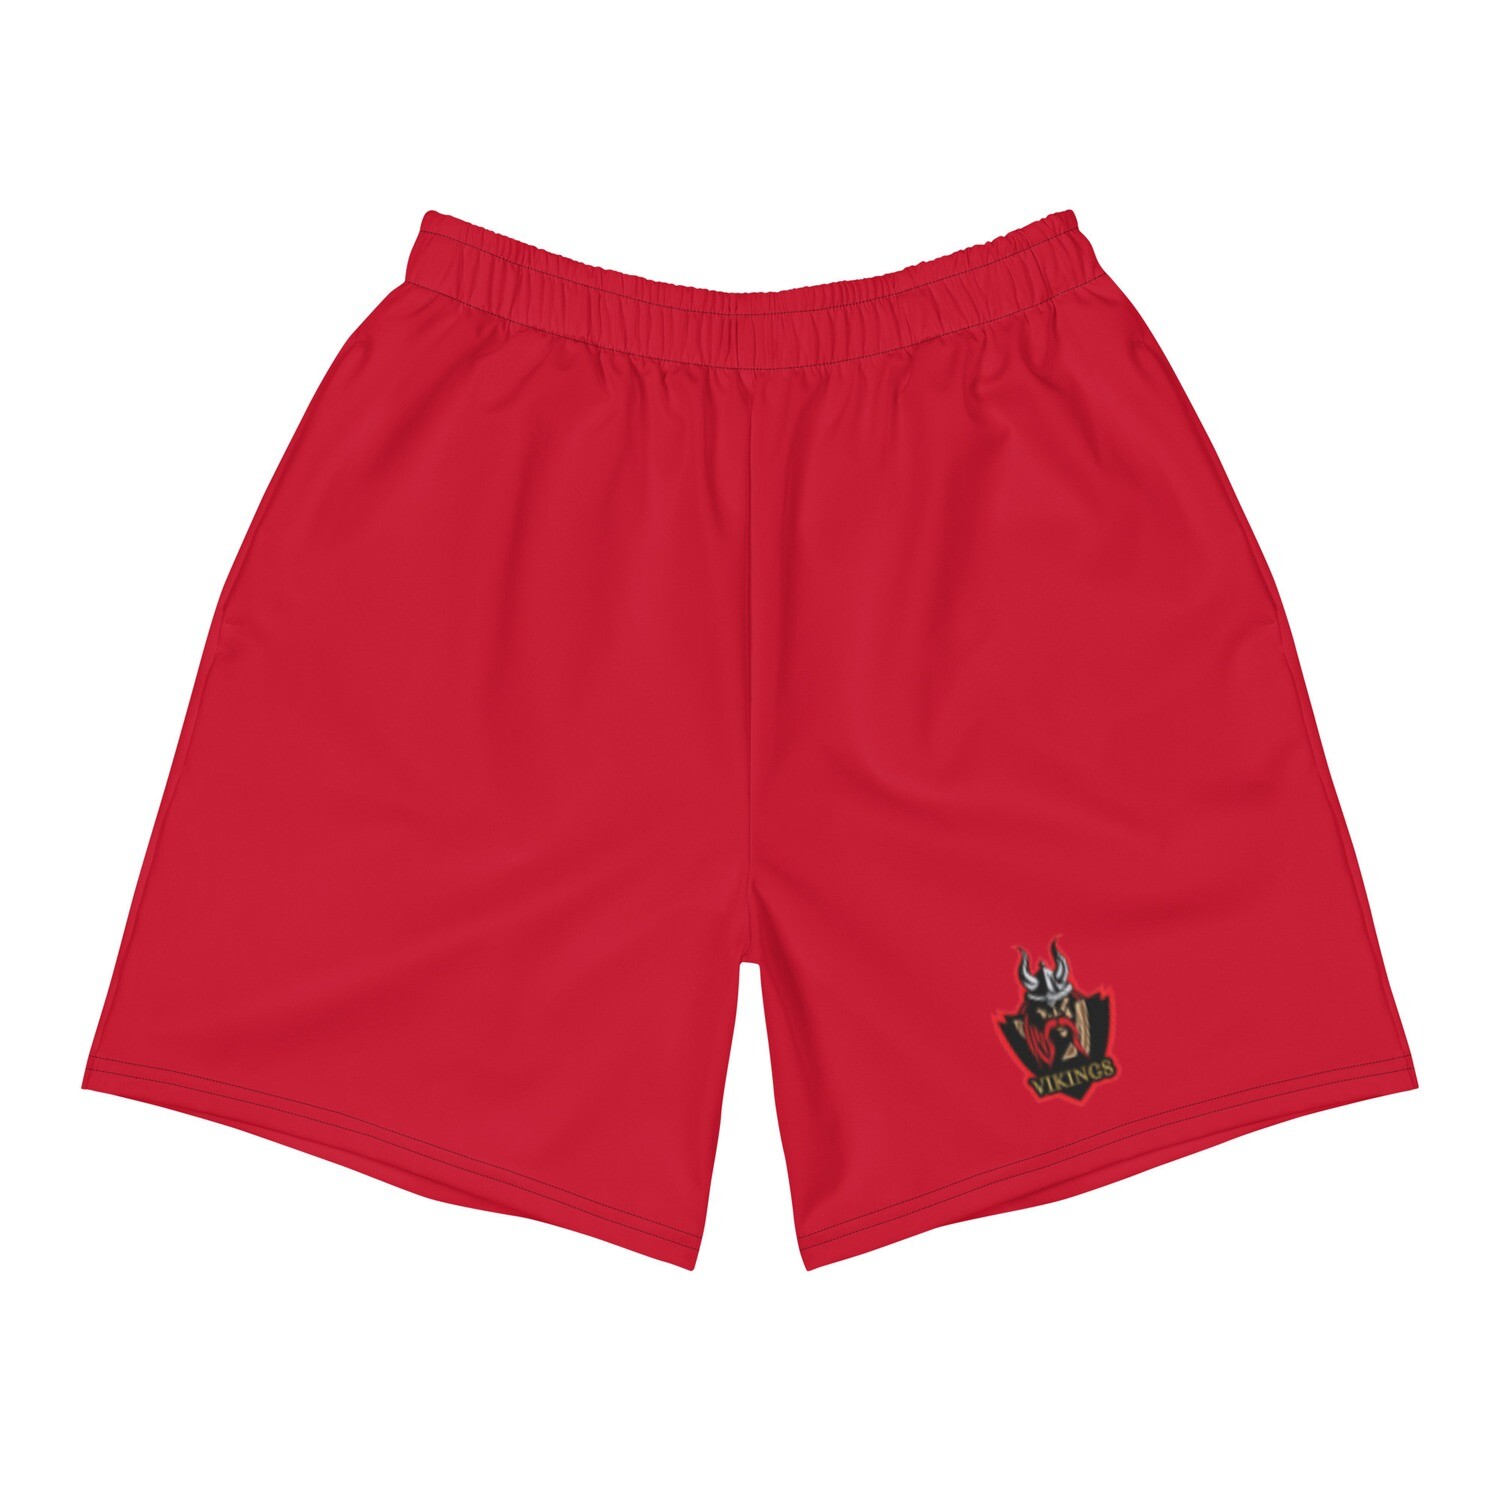 Men's Athletic Shorts - Red